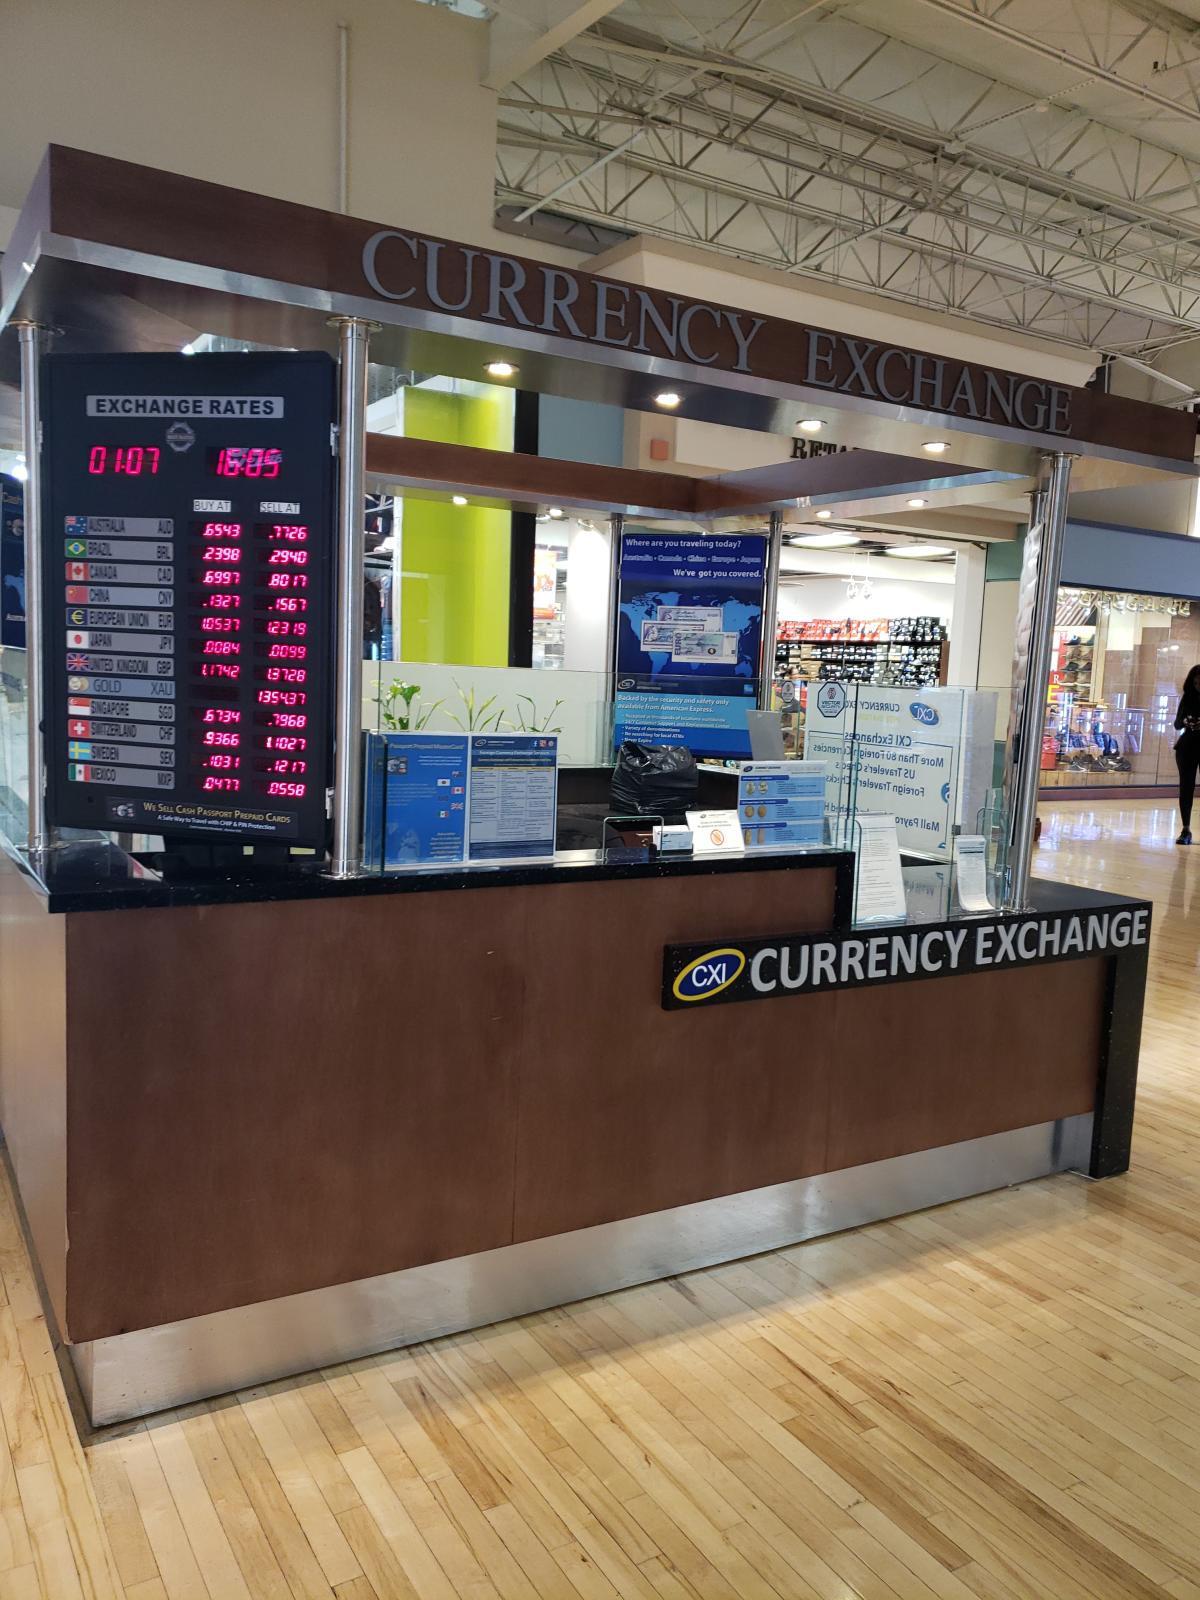 CXI Copley Place – Currency Exchange in Boston, MA - Currency Exchange  International, Corp.